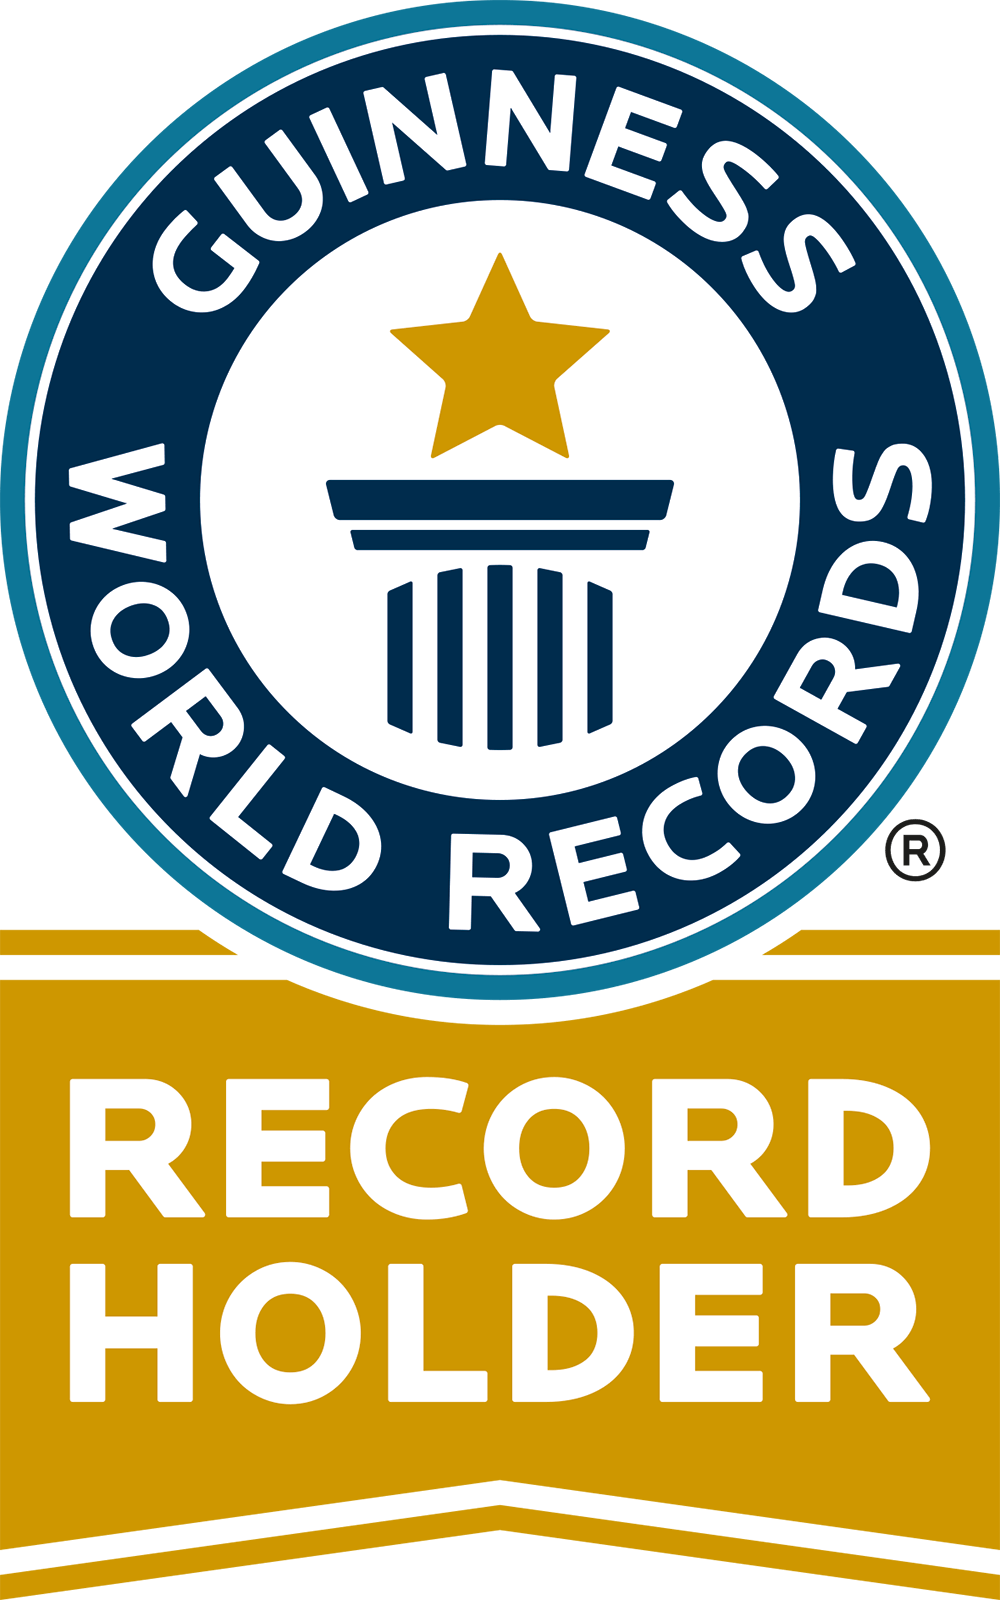 Guinness World Records Seal